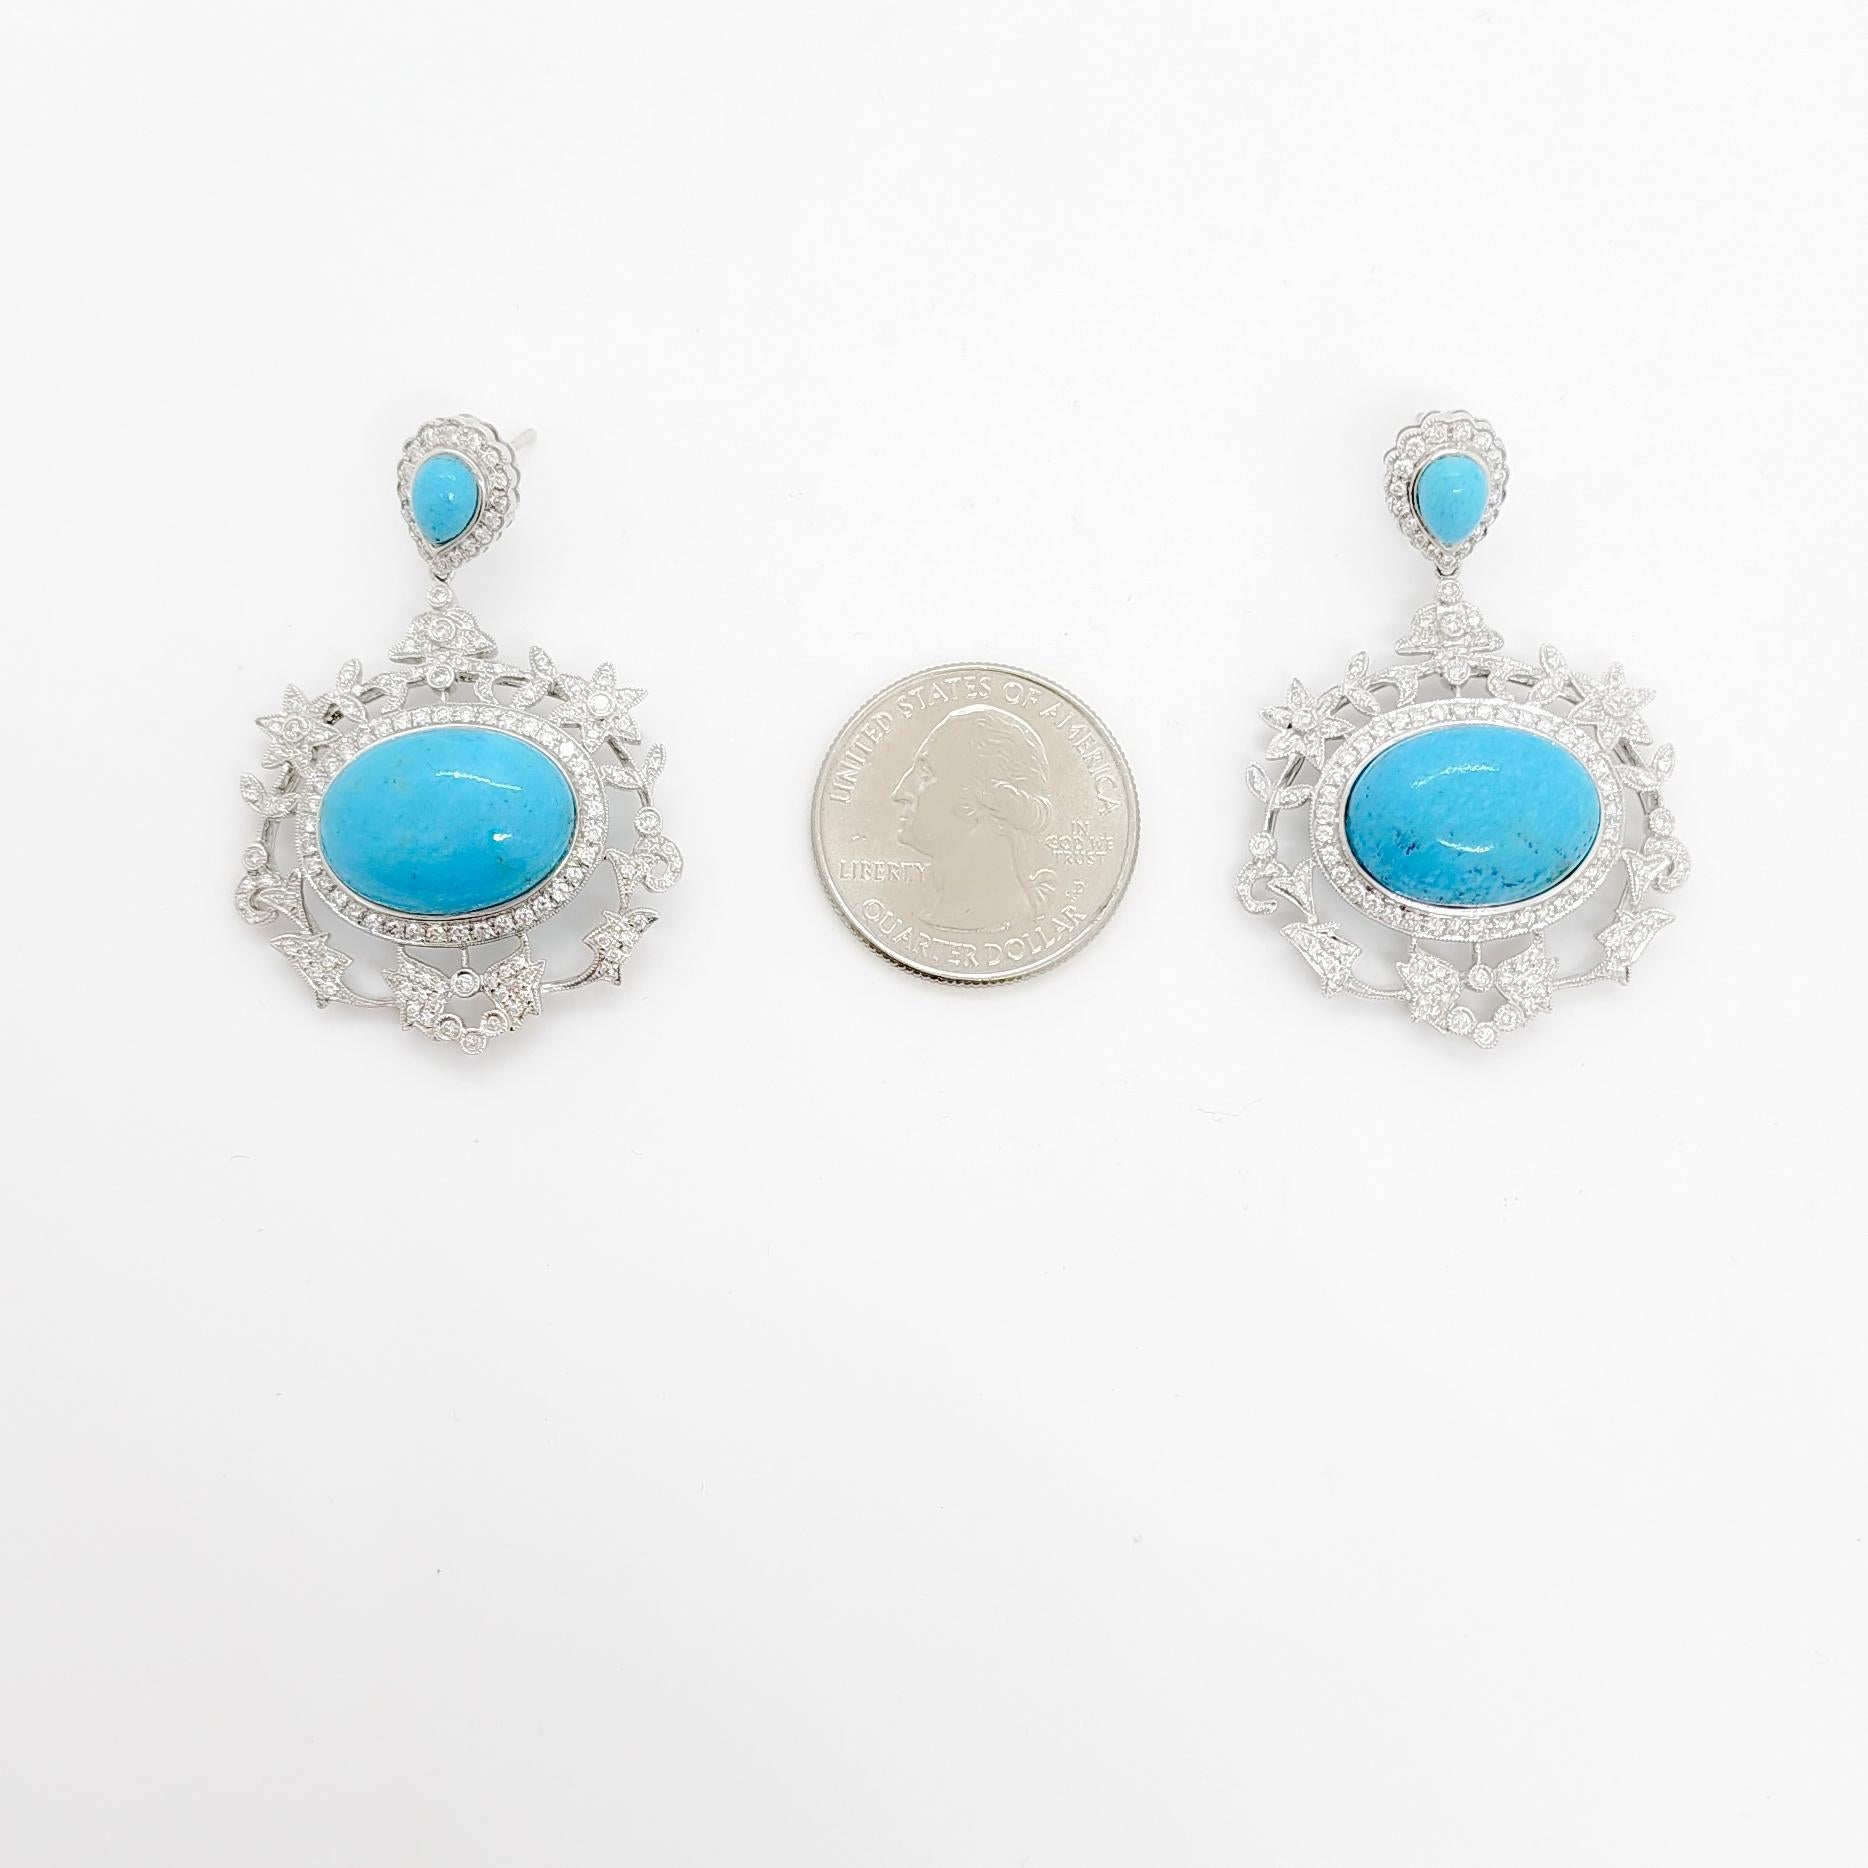 Gorgeous big turquoise cabochons with 2.00 ct. good quality white diamond rounds.  Handmade in 18k white gold.  These dangle push back earrings are beautiful.